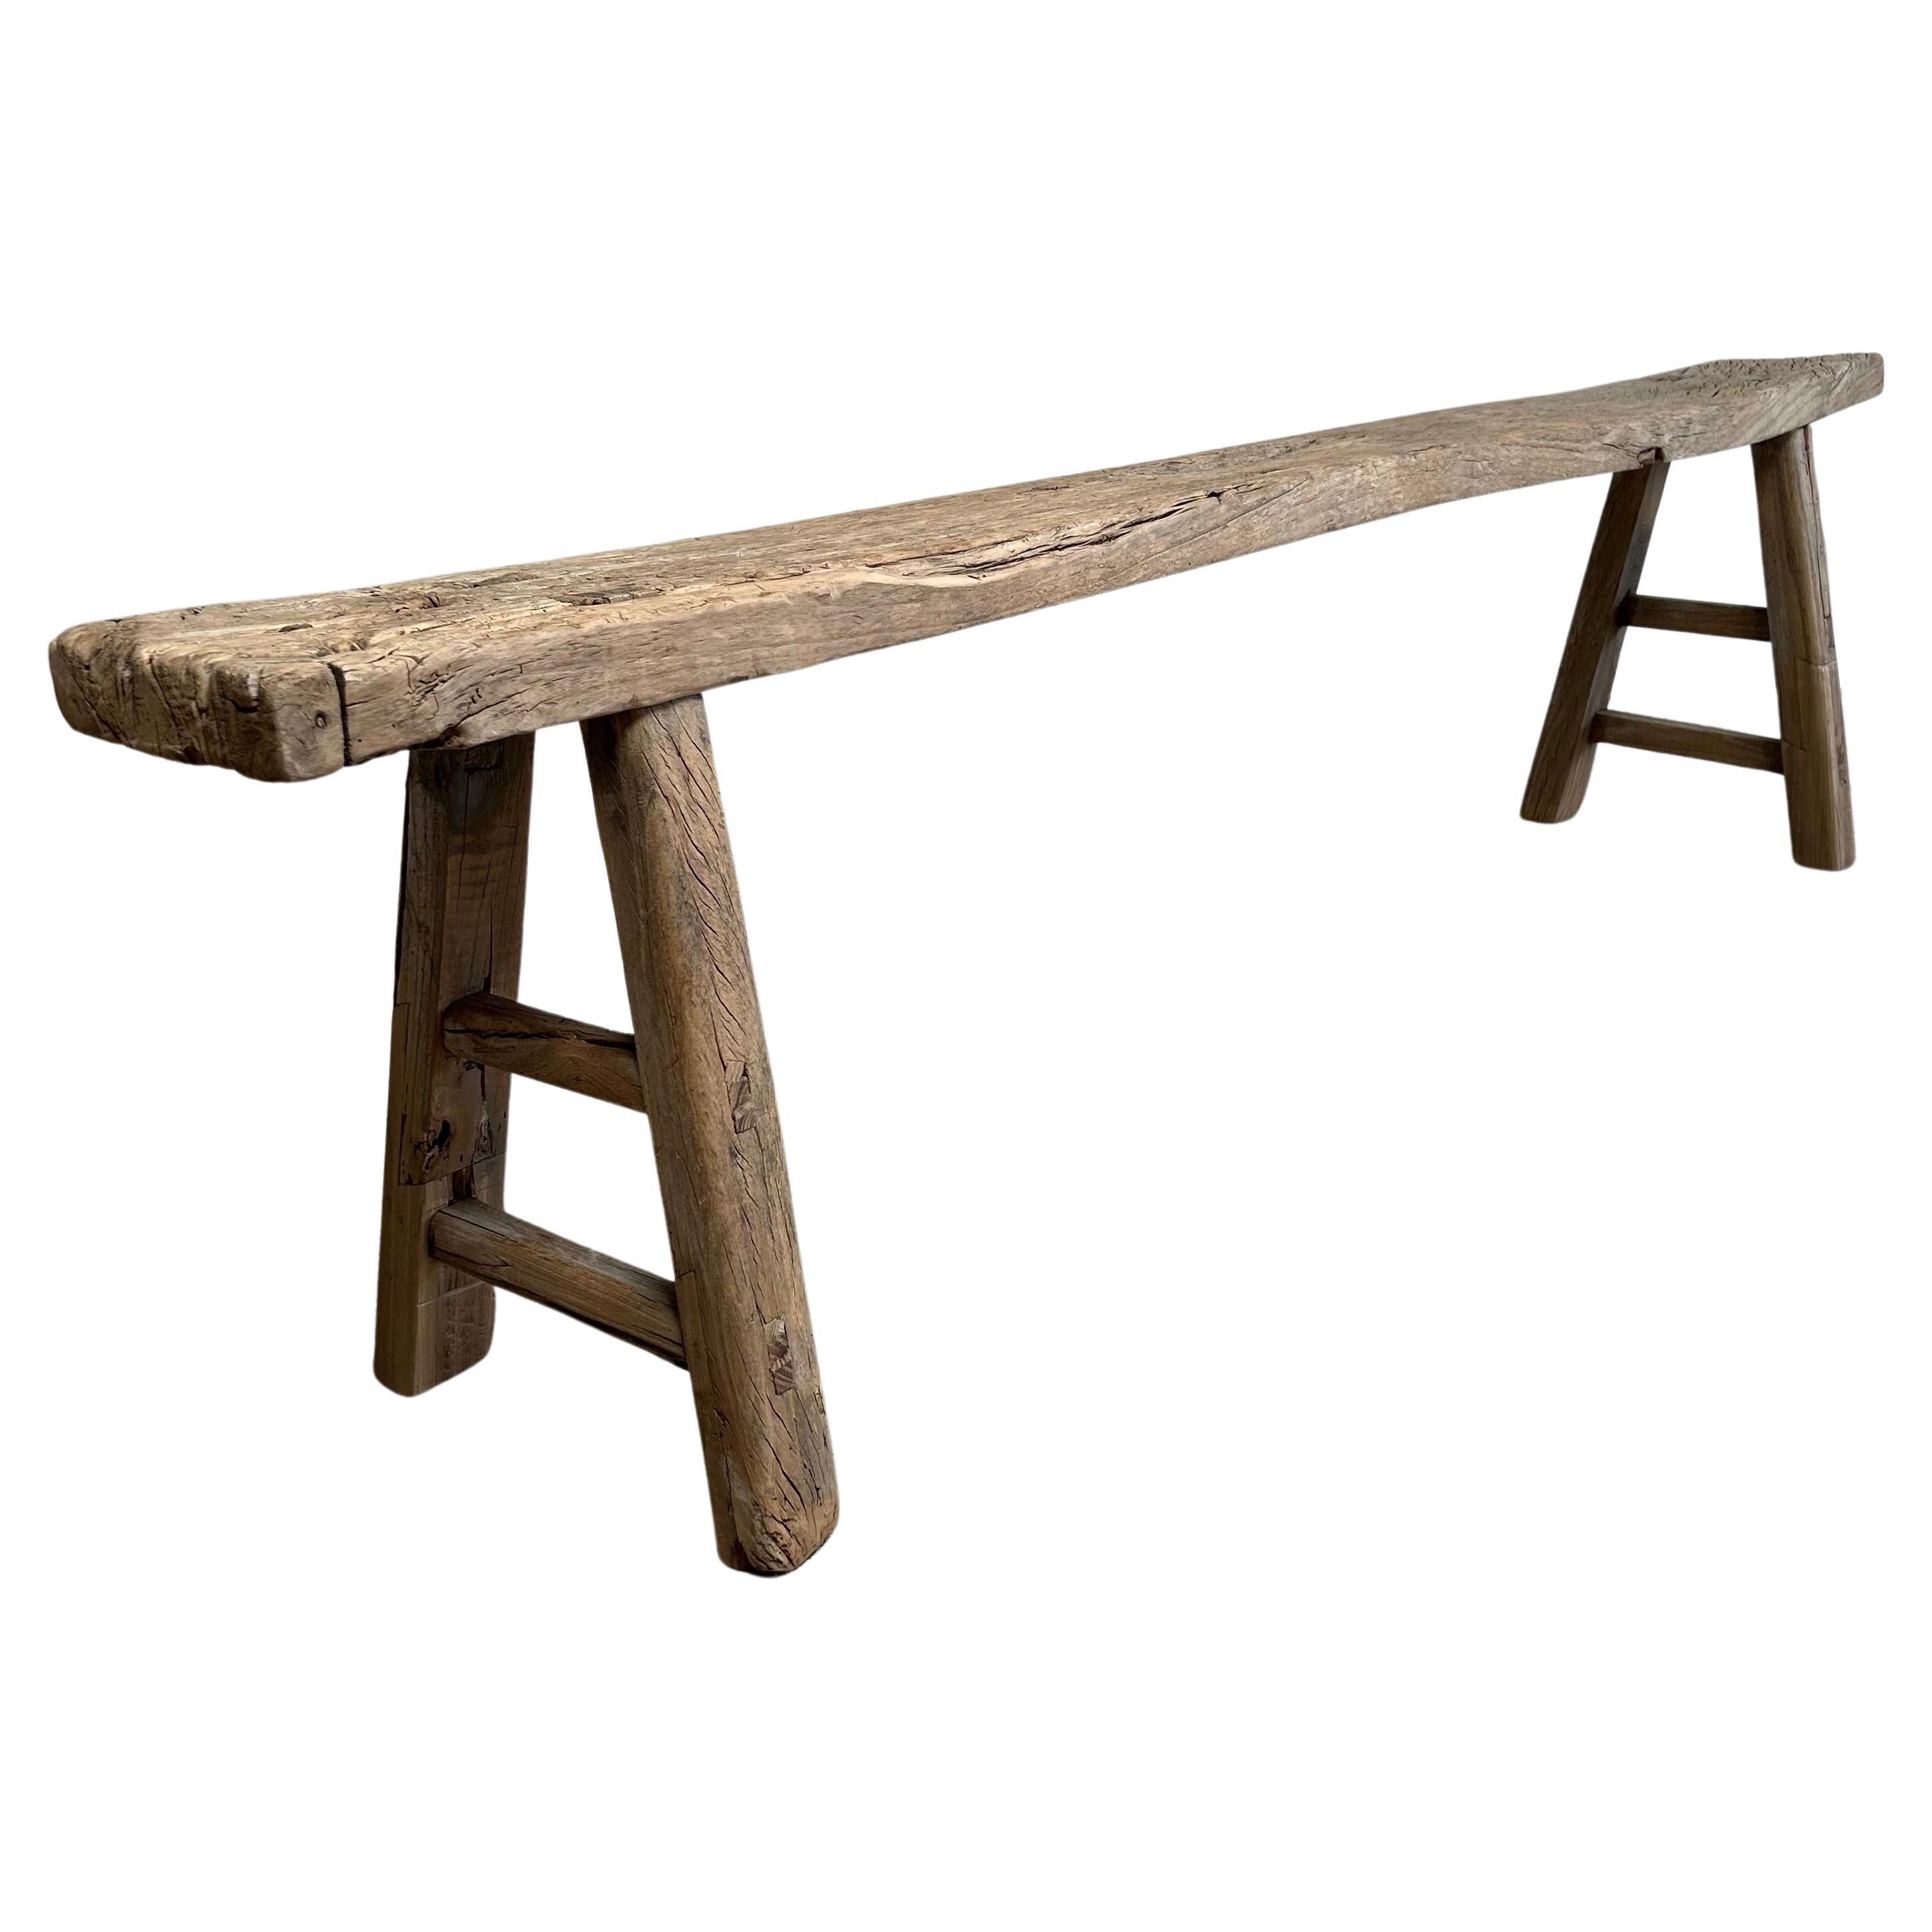 Vintage Elm Wood Skinny Bench with Aged Patina